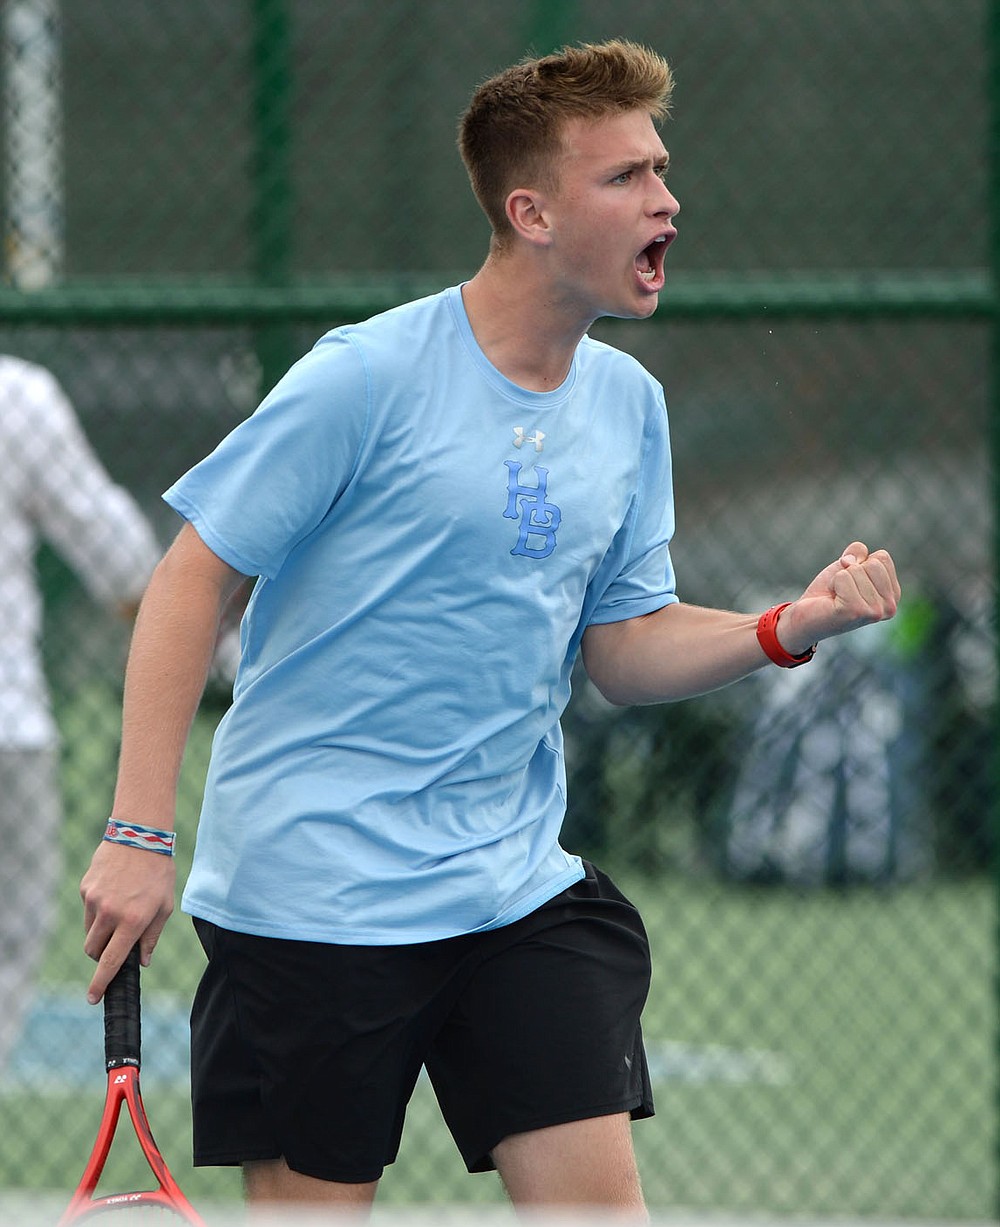 Hayden Swope of Springdale Har-Ber and his brother, Carter Swope are the NWADG boys doubles Players of the Year after winning conference, state, and overall championships this season. Hayden Swope is a senior.